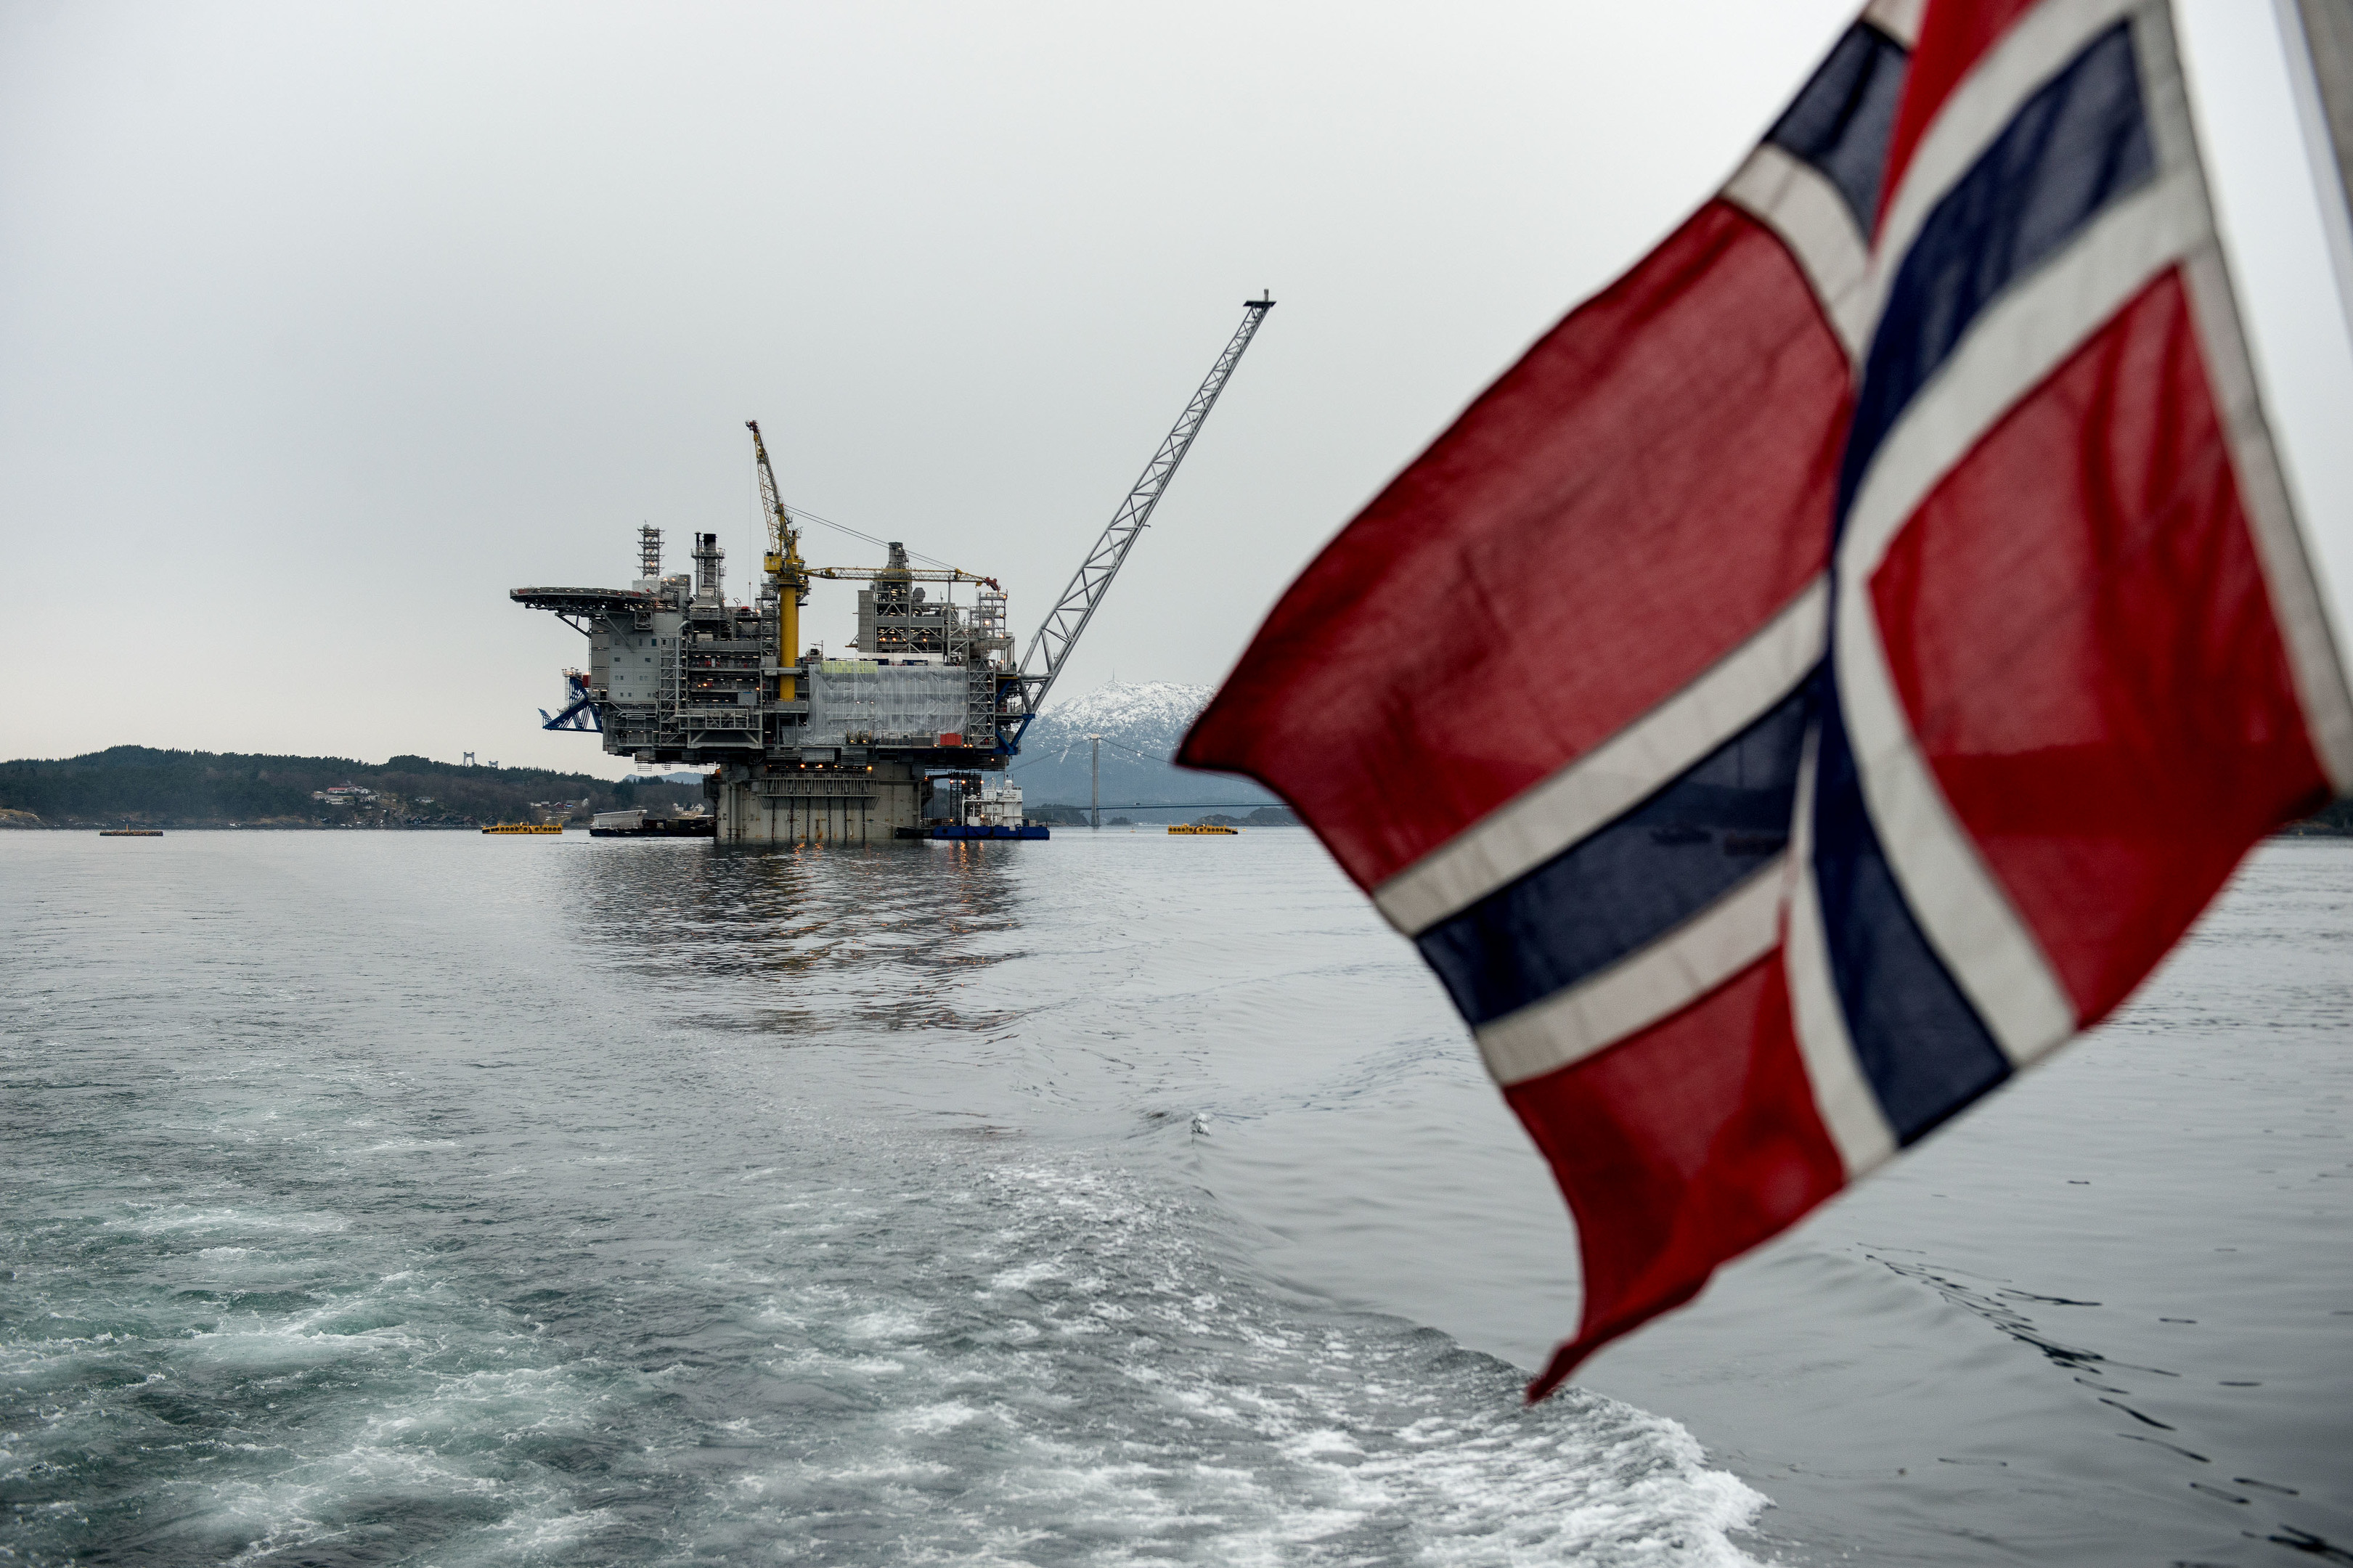 A Norwegian national flag flies from the back of a boat in view of the the Aasta Hansteen gas platform